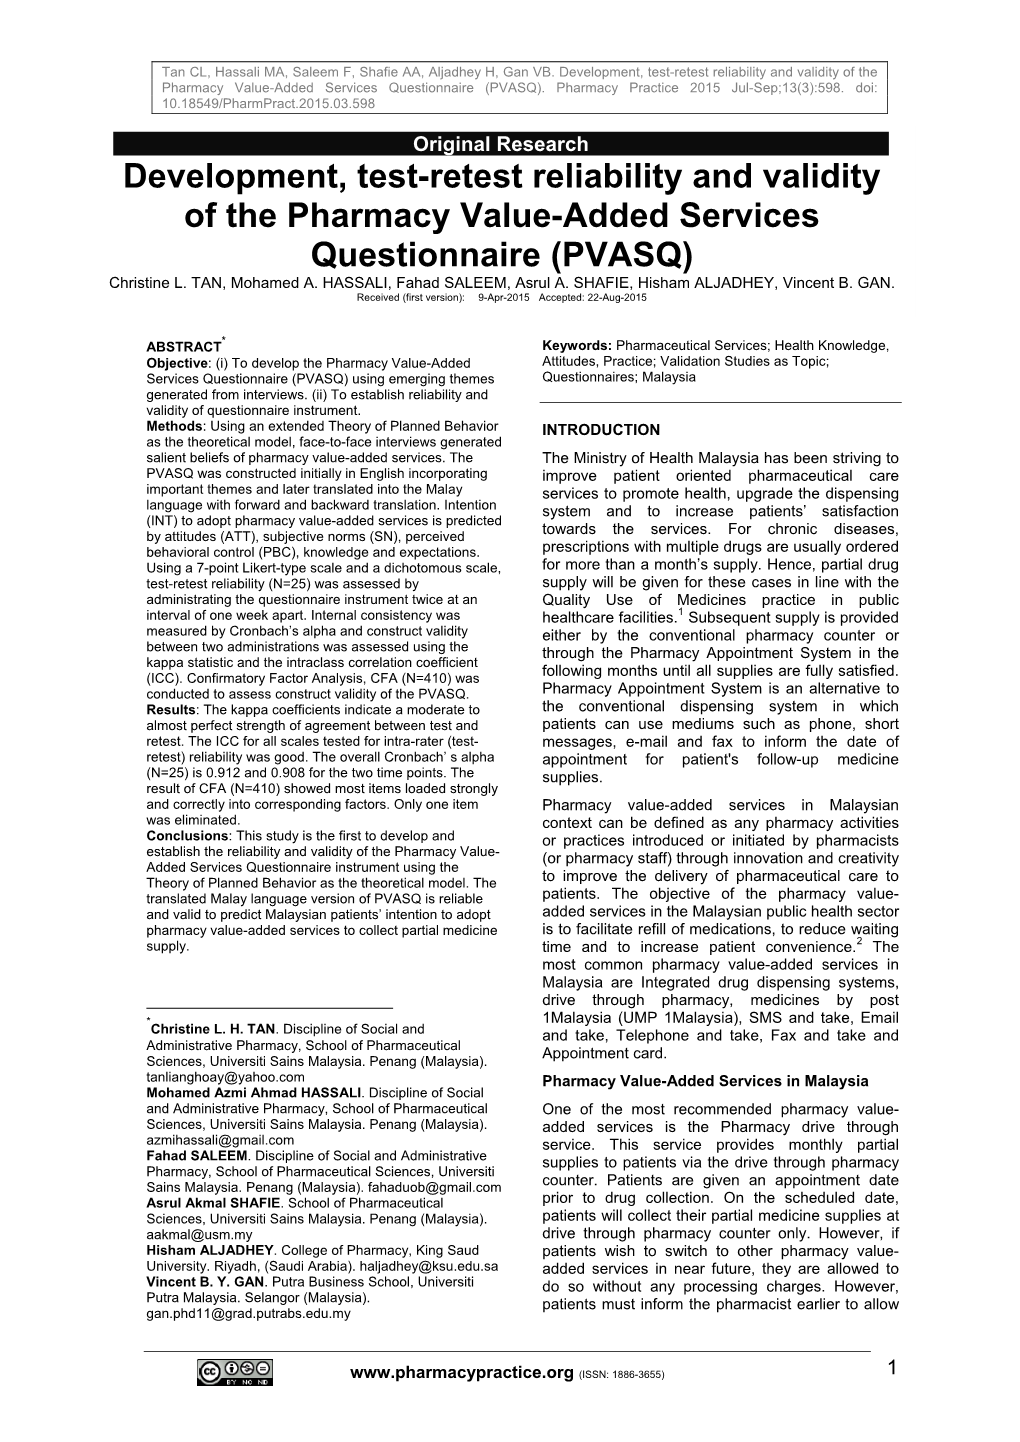 Development, Test-Retest Reliability and Validity of the Pharmacy Value-Added Services Questionnaire (PVASQ)